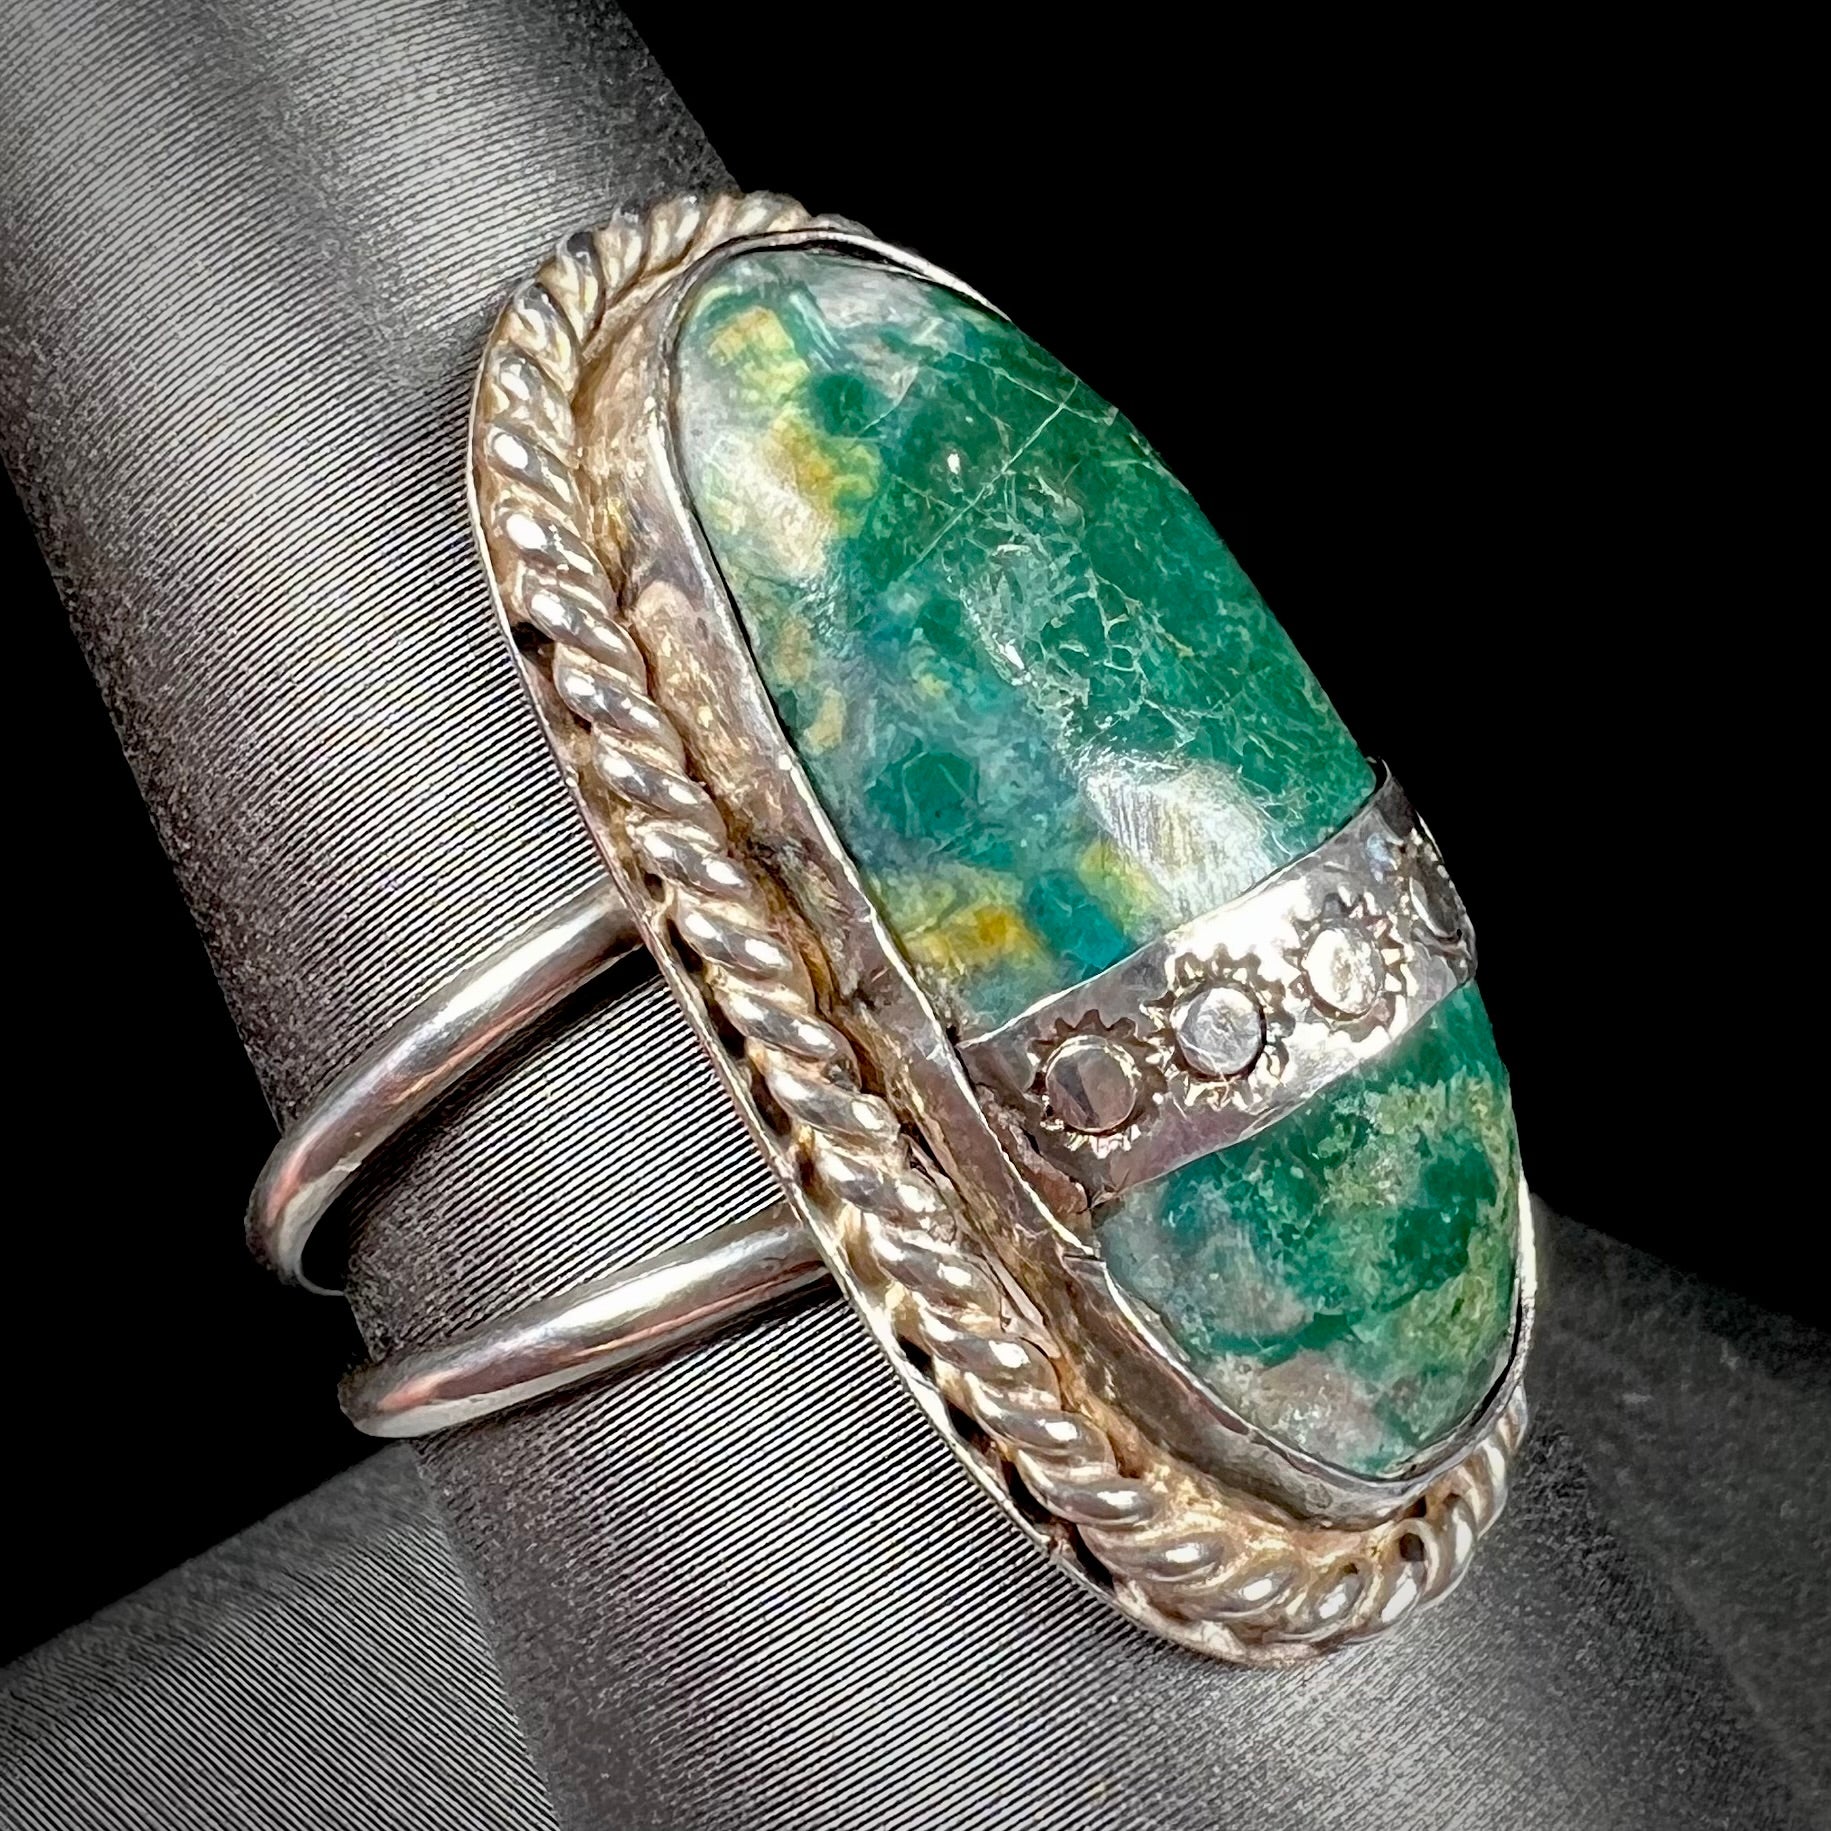 A green agate solitaire ring handmade from sterling silver.  There is a stamped pattern of suns across a strip of metal over the stone.